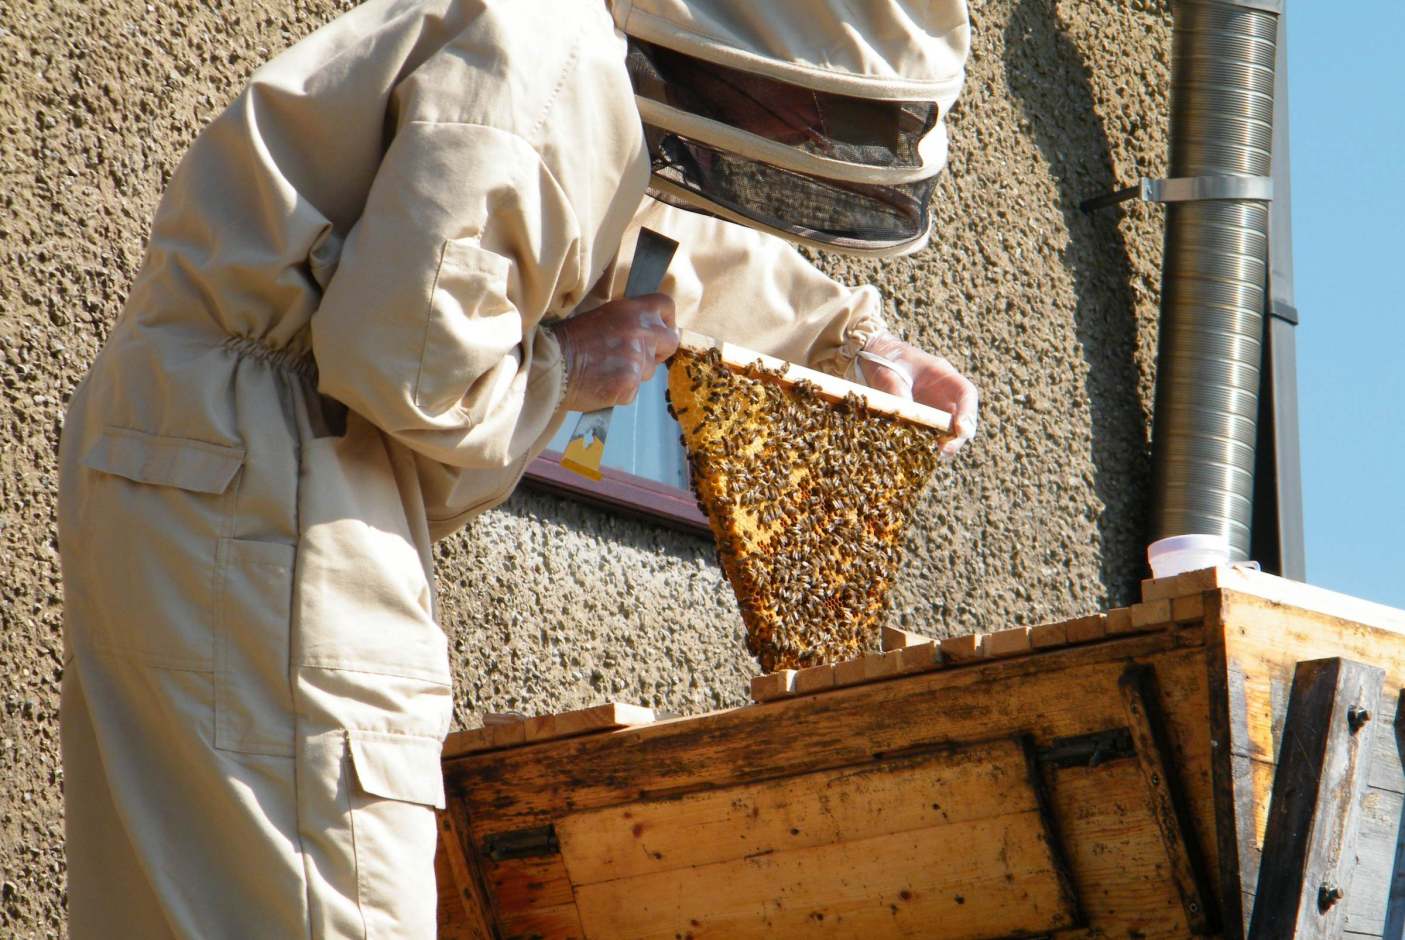 III. Sustainable Beekeeping Practices for Ethical Consumerism